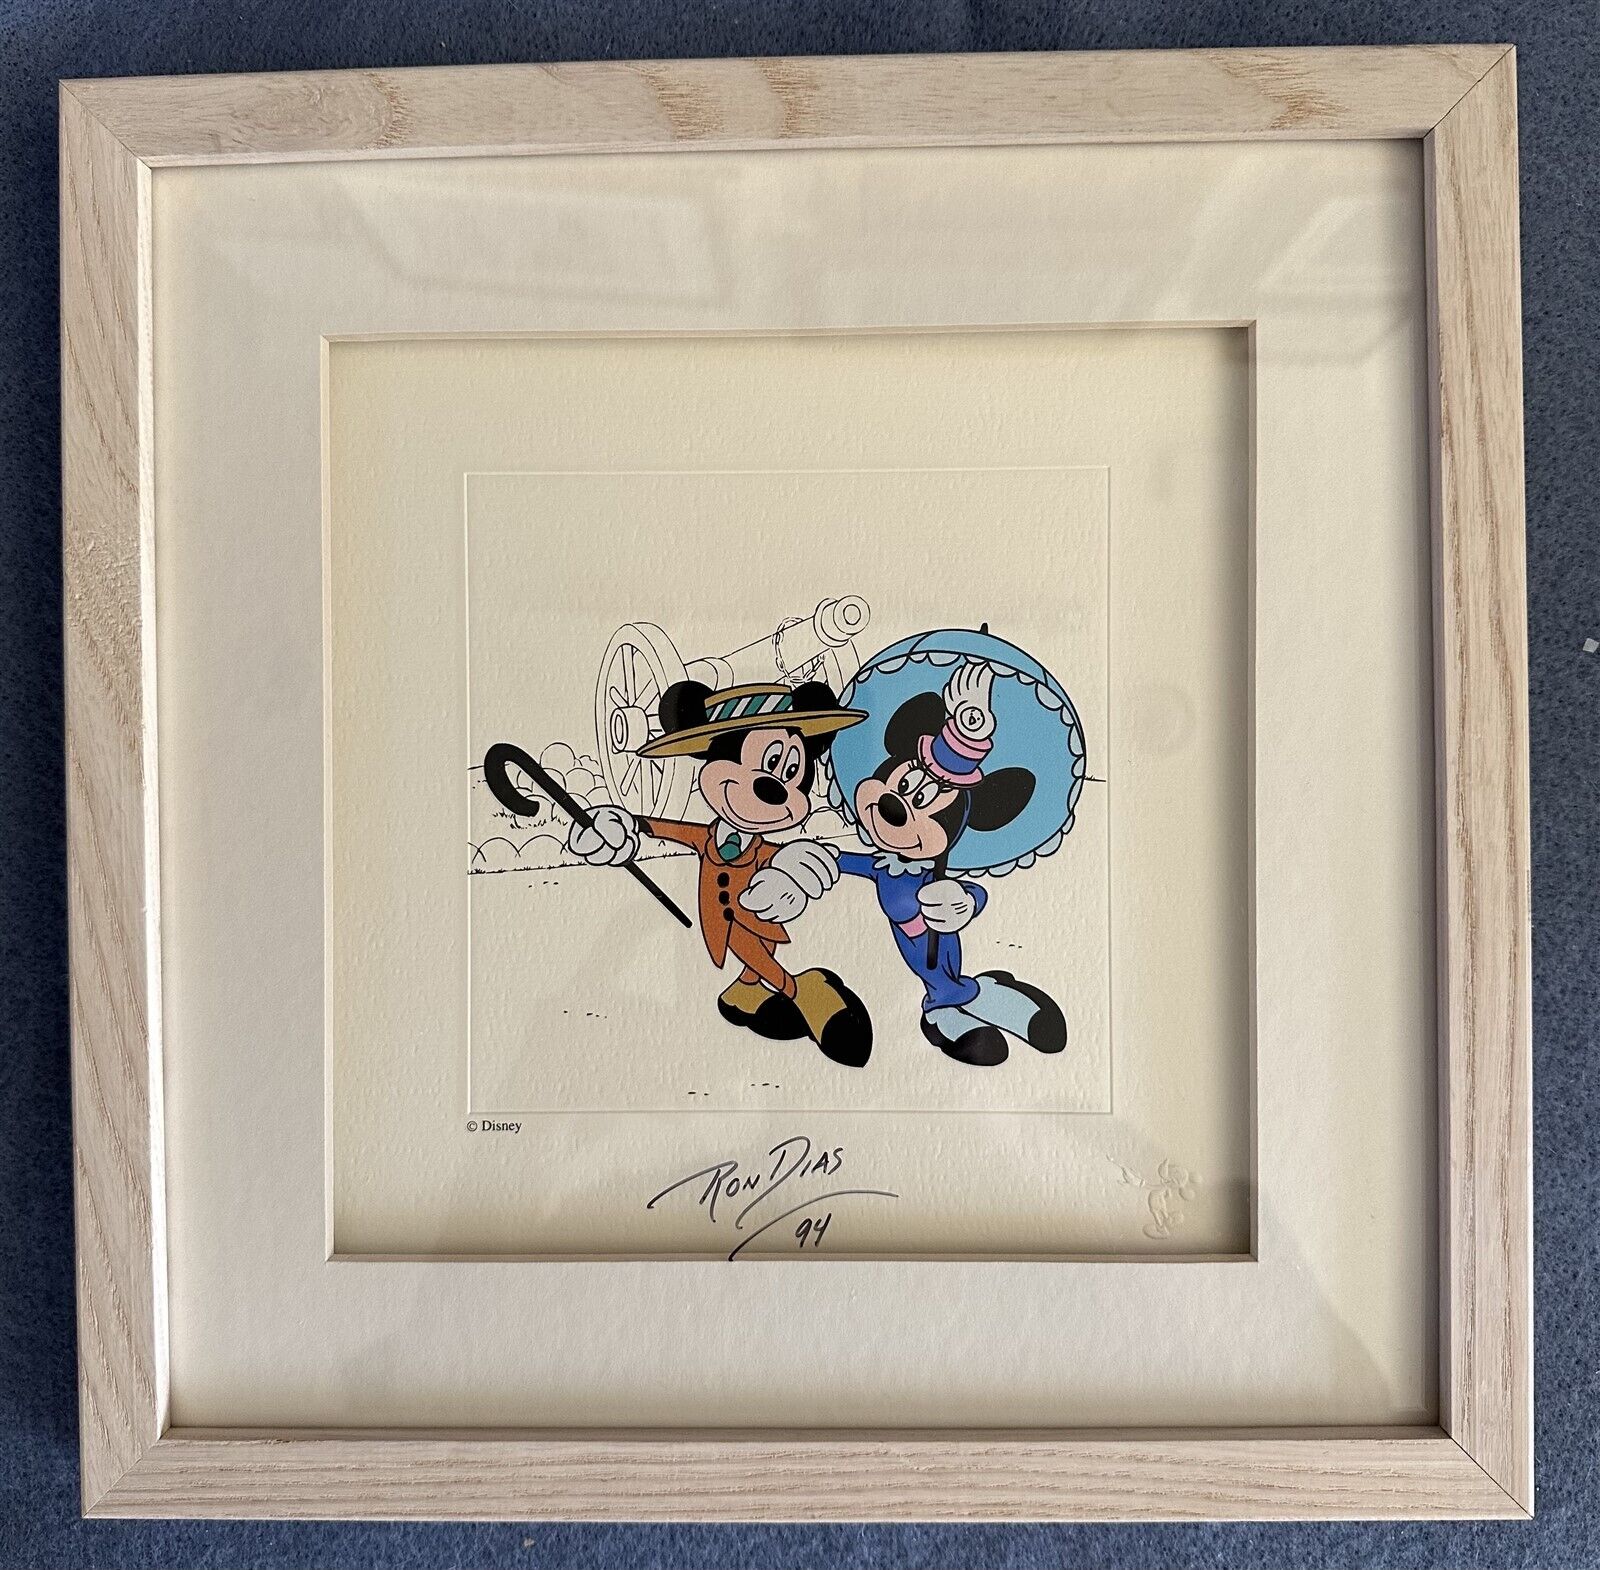 Disney Treasures NIFTY NINETIES Mickey Mouse 1941 Framed Print Signed by Artist